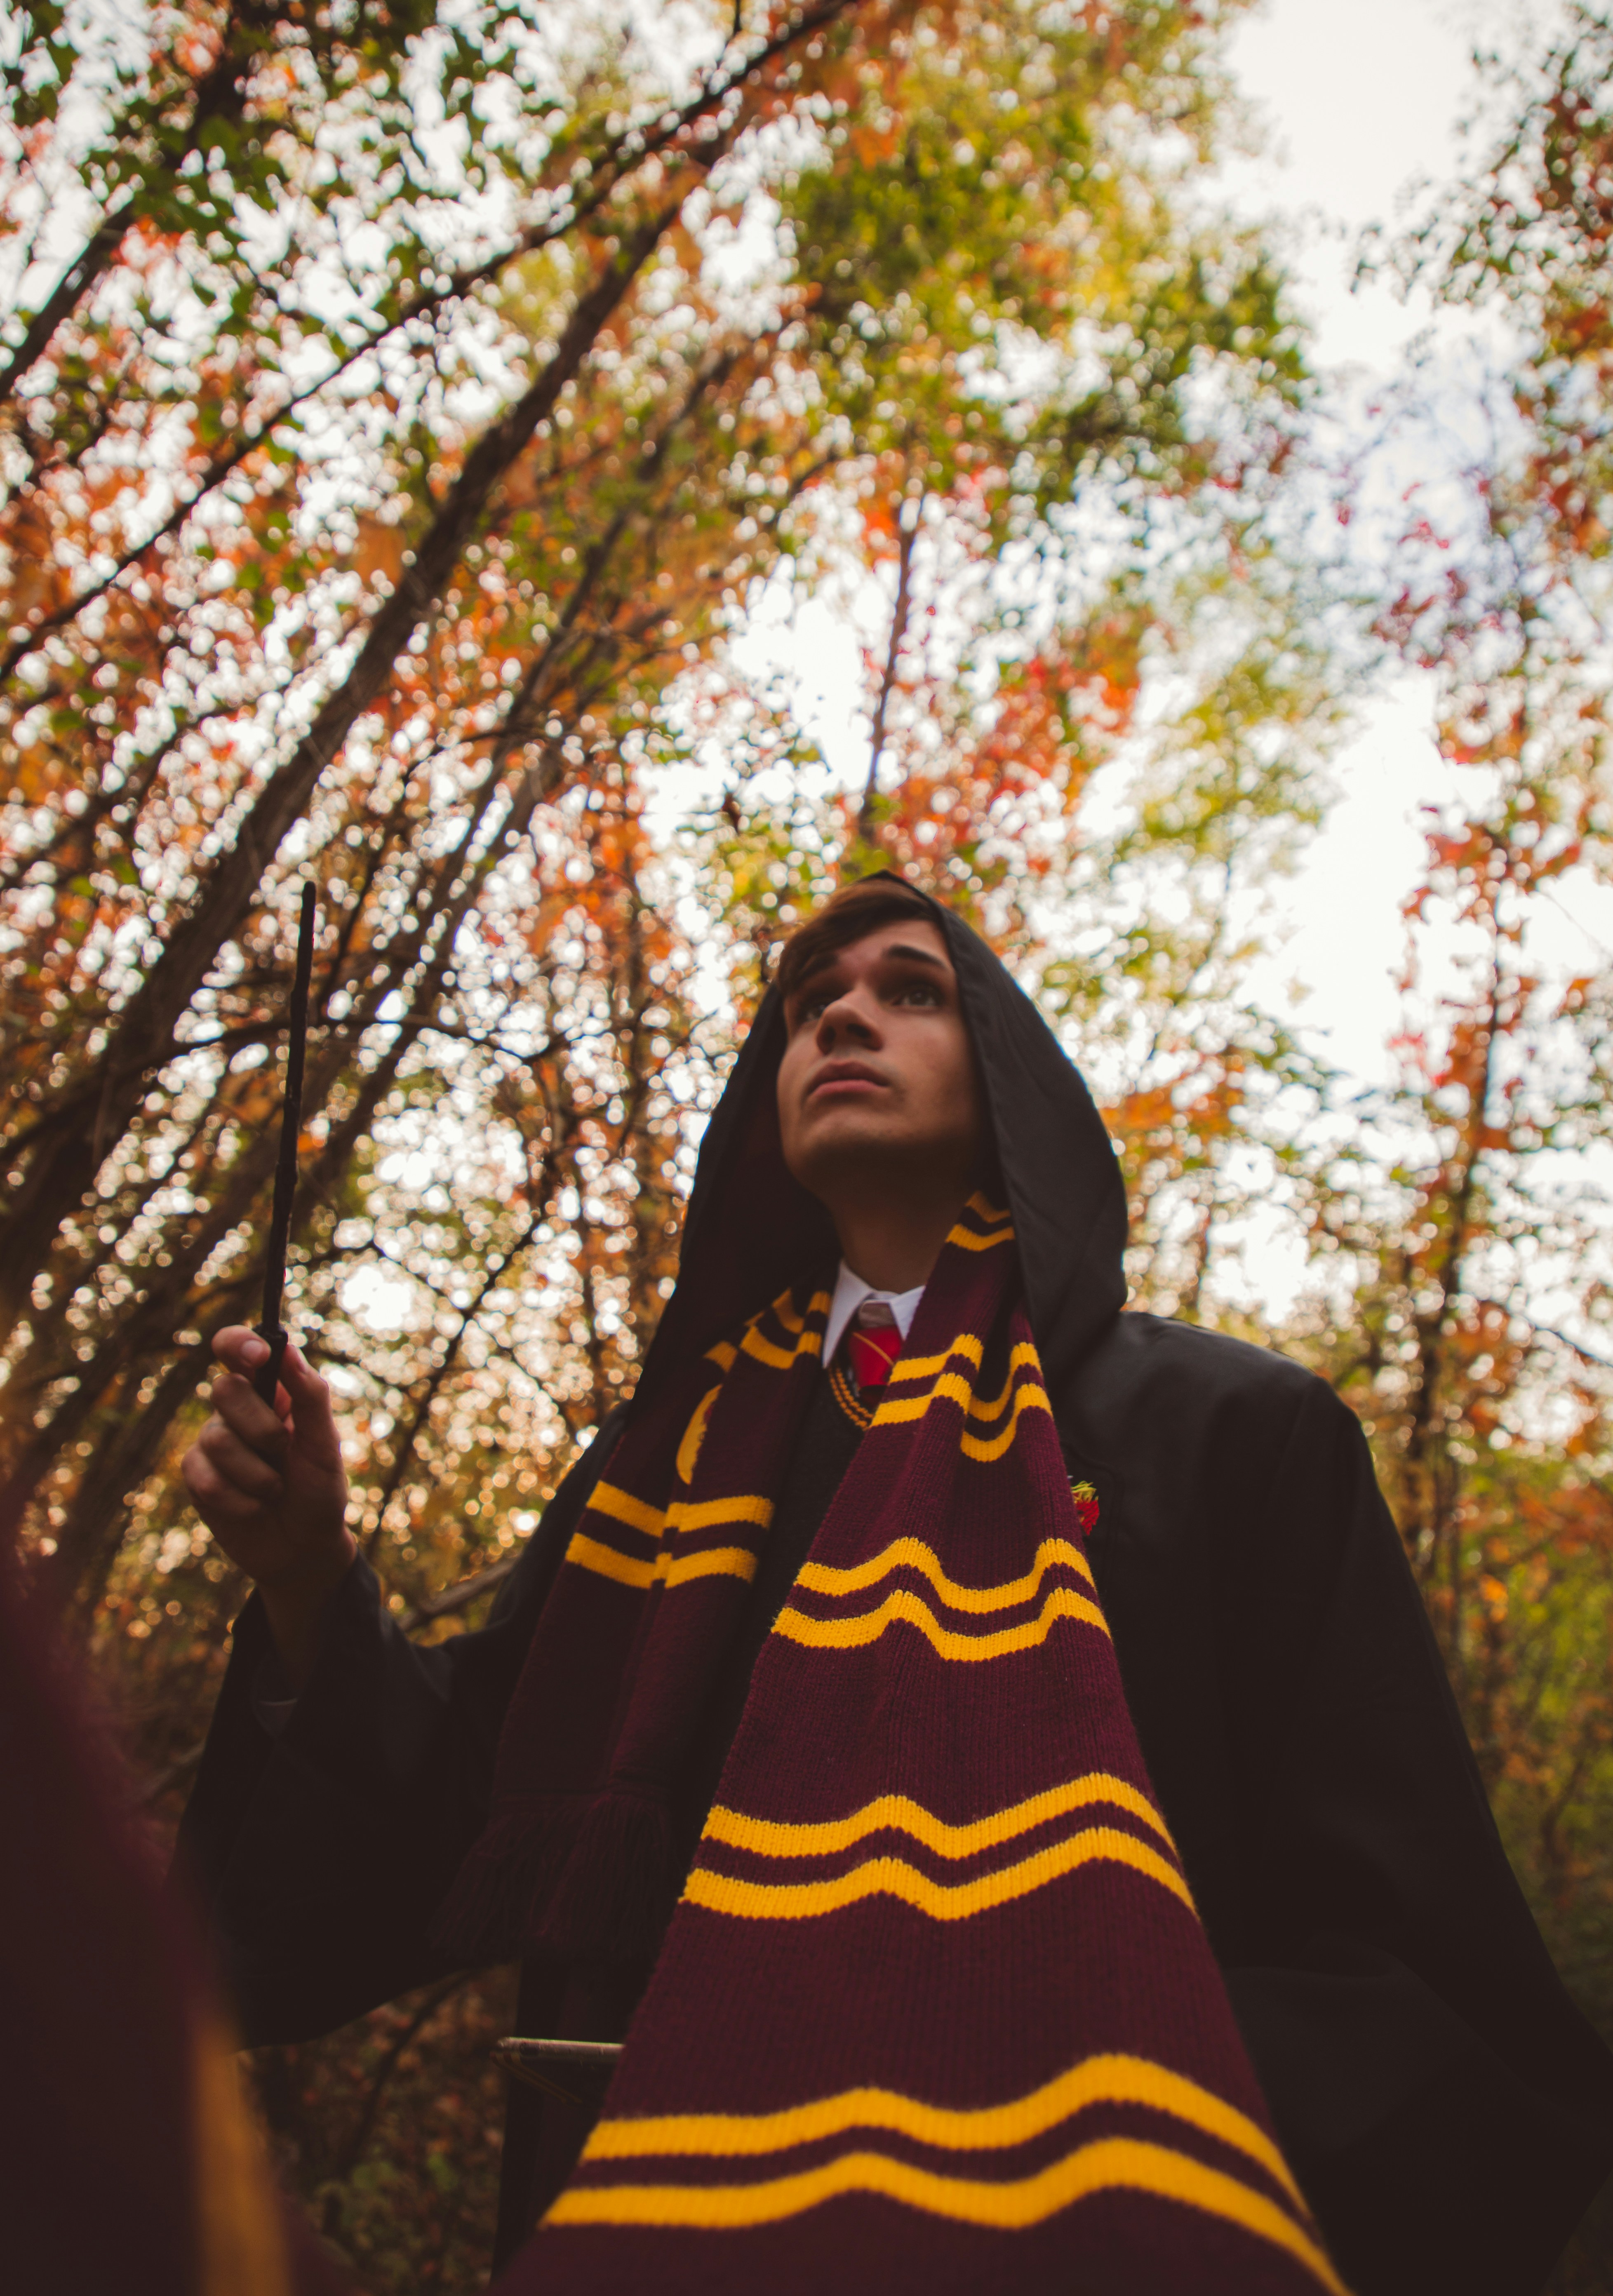 Doing magic or falling in trouble? Jovan Vasiljević, a young man, fellow Gryffindor house student wanders around the forest practicing spells. 